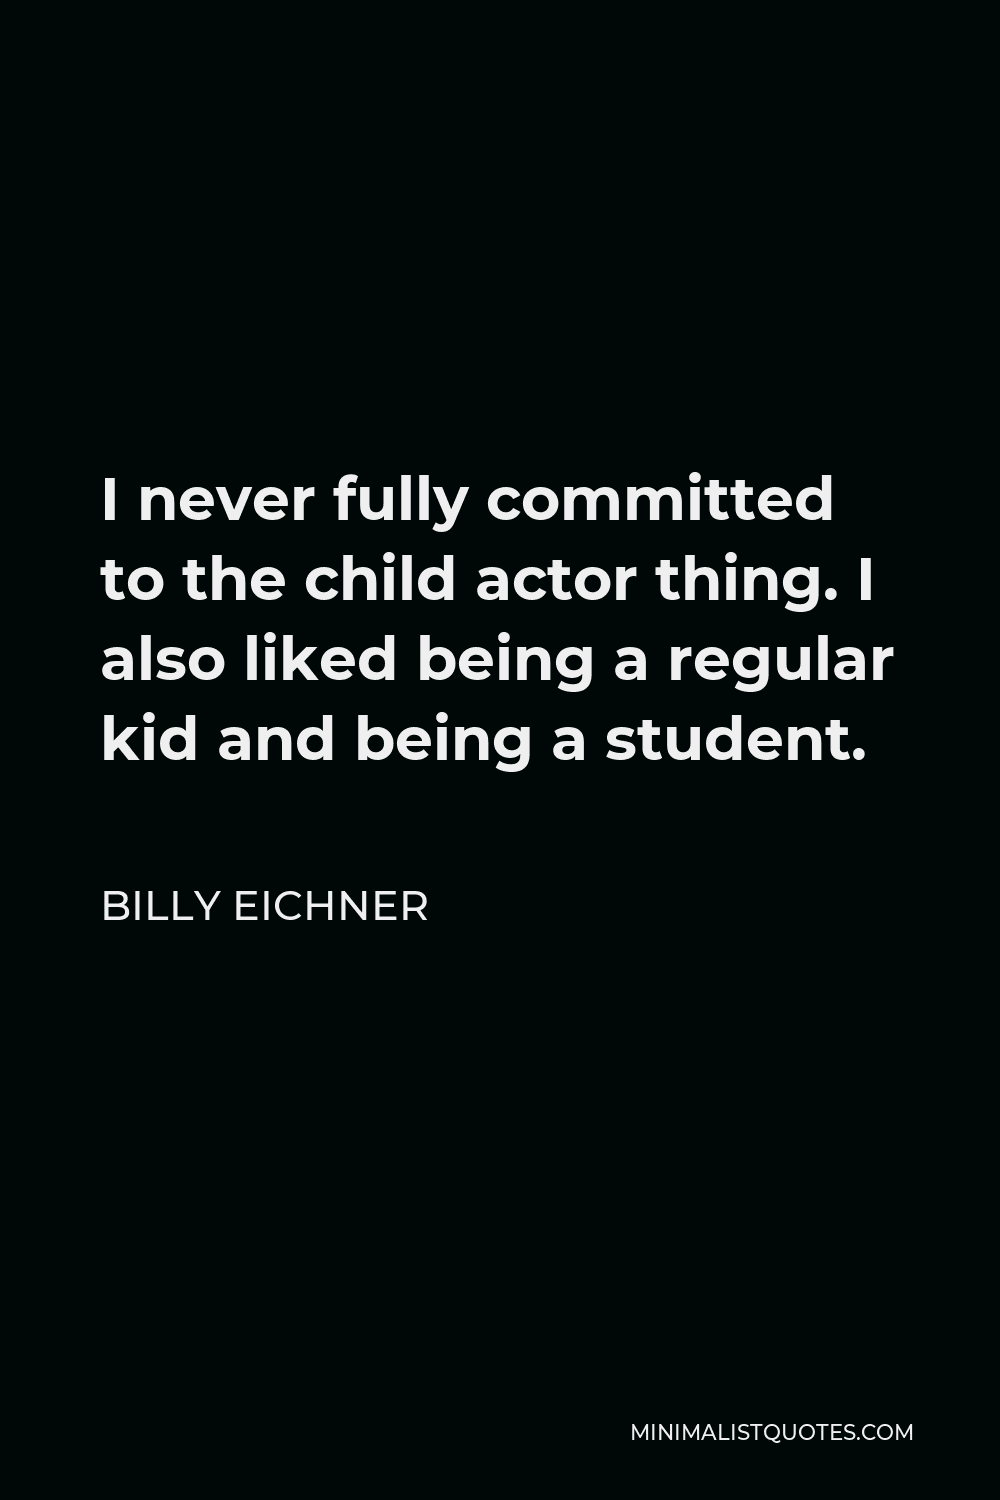 Billy Eichner Quote - I never fully committed to the child actor thing. I also liked being a regular kid and being a student.